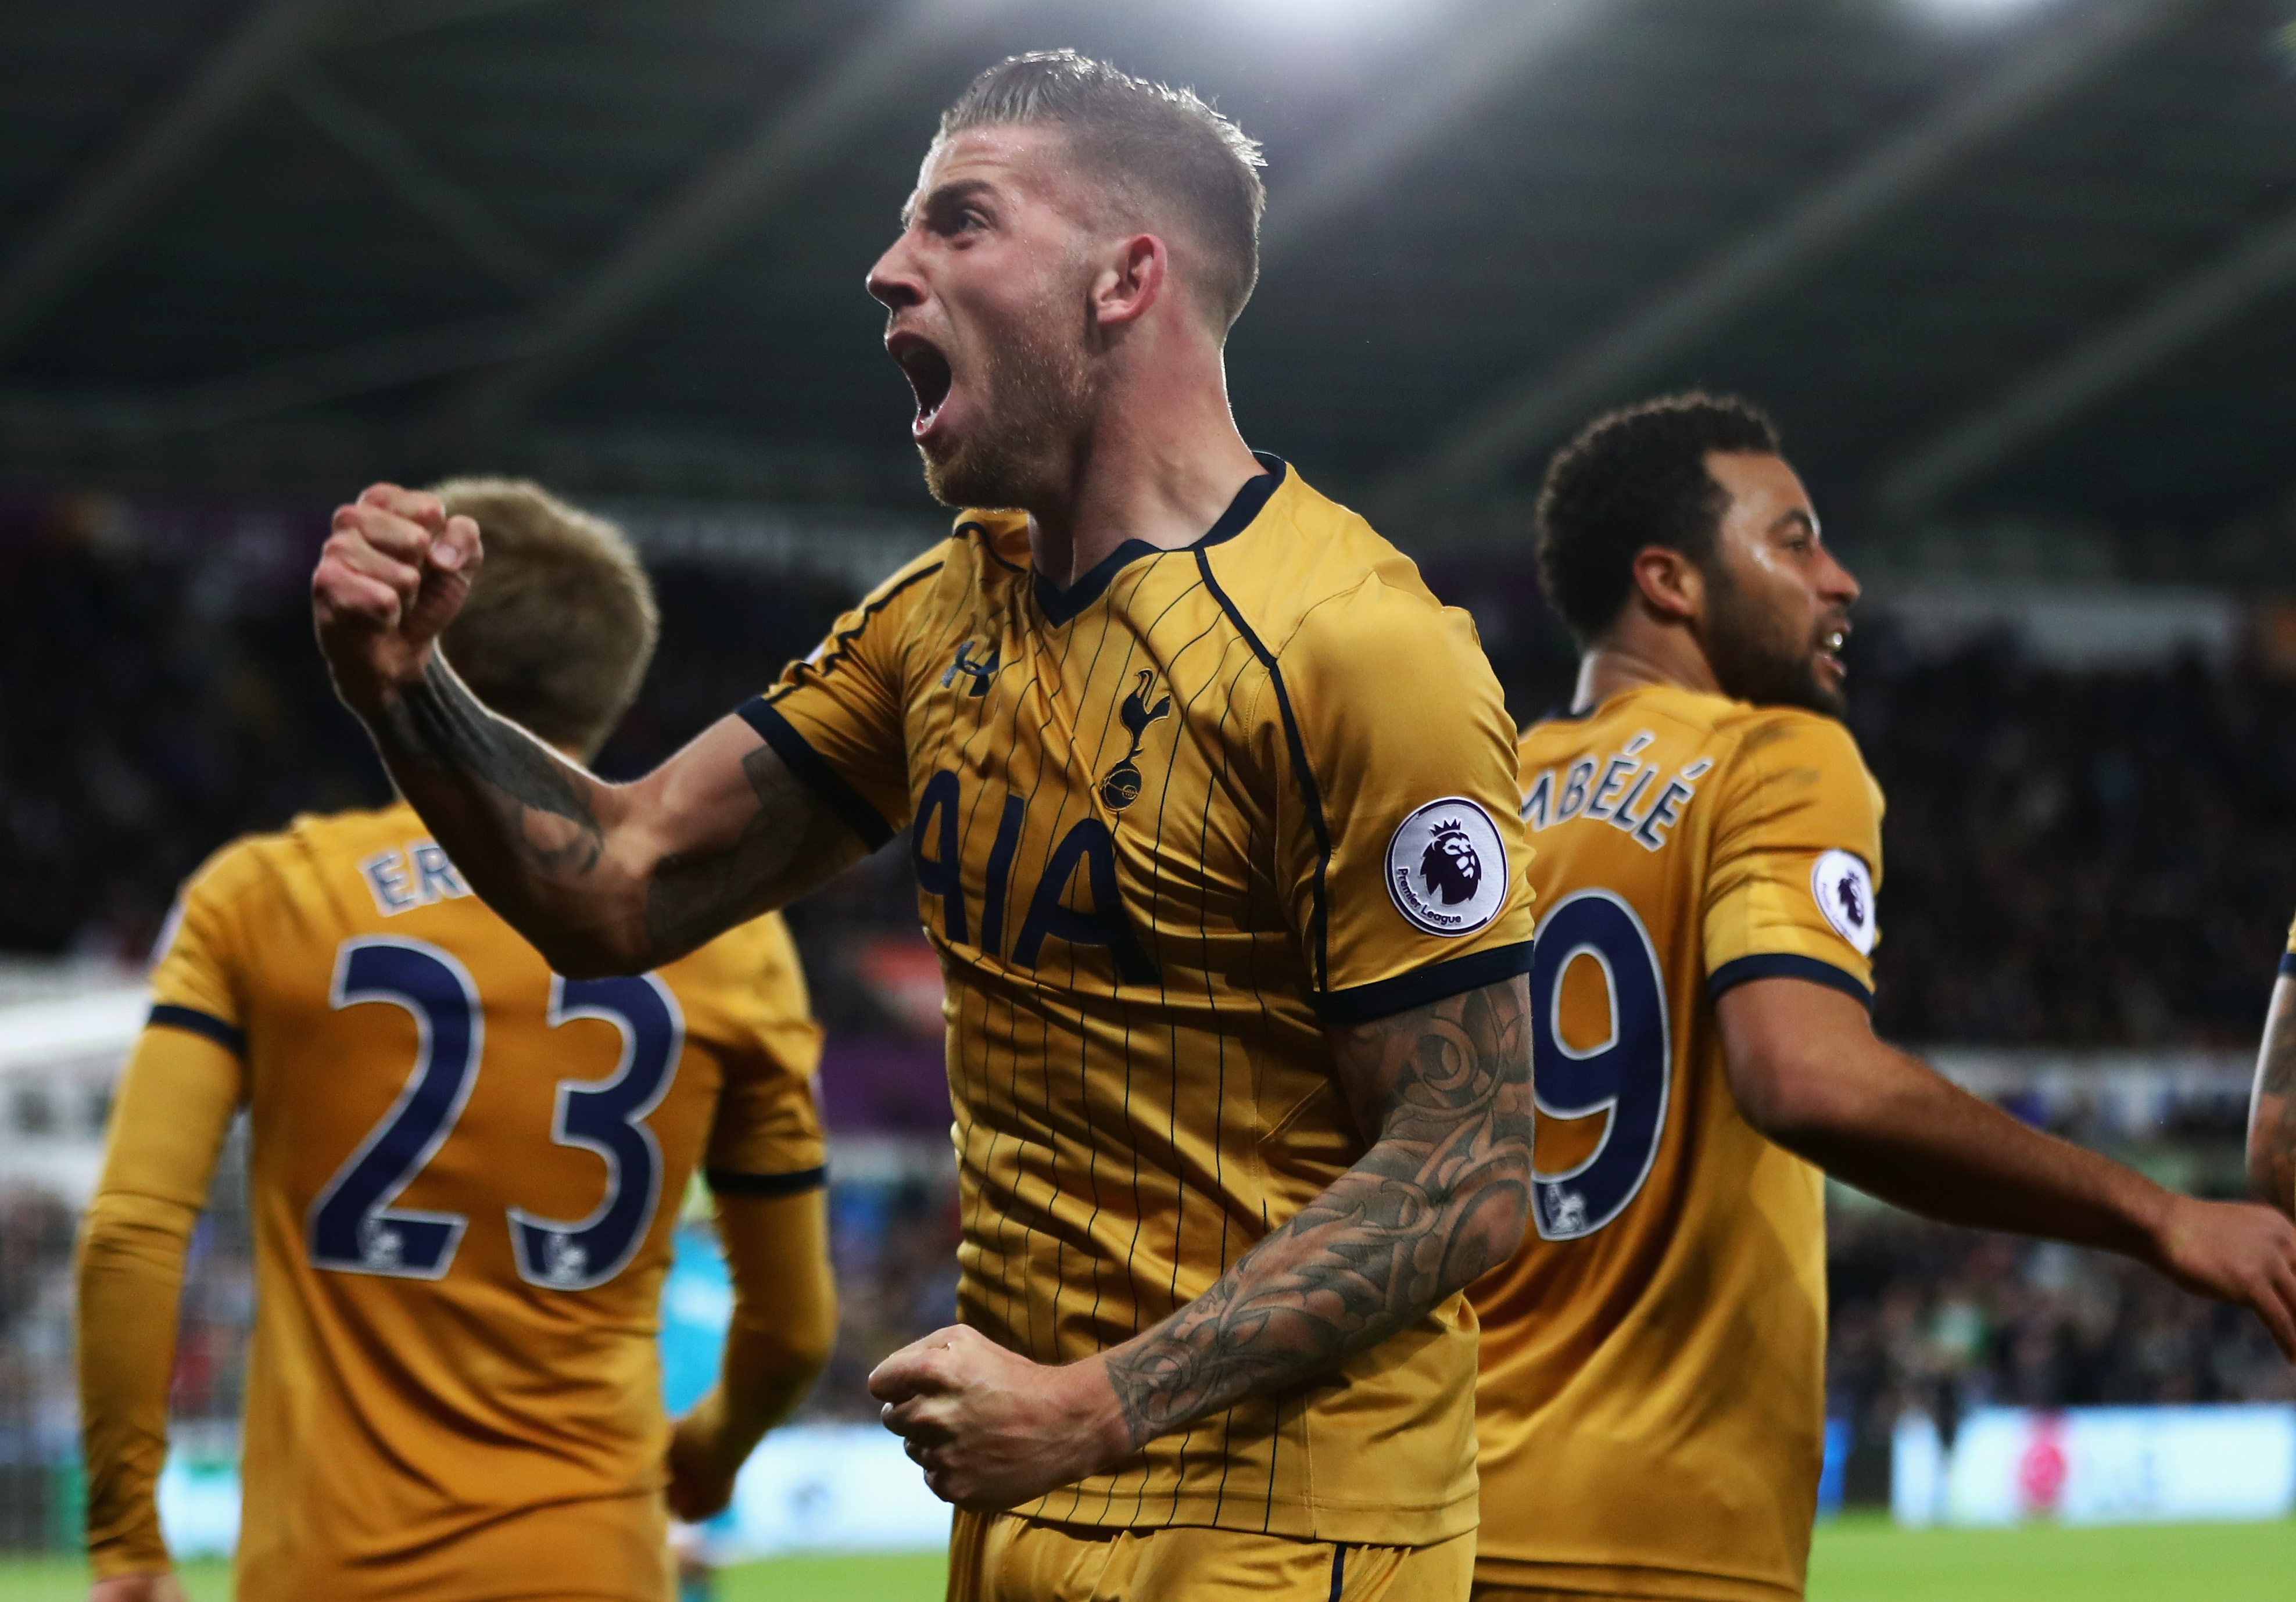 SWANSEA, WALES - APRIL 05: Toby Alderweireld of Tottenham Hotspur celebrates his sides third goal during the Premier League match between Swansea City and Tottenham Hotspur at the Liberty Stadium on April 5, 2017 in Swansea, Wales.  (Photo by Michael Steele/Getty Images)